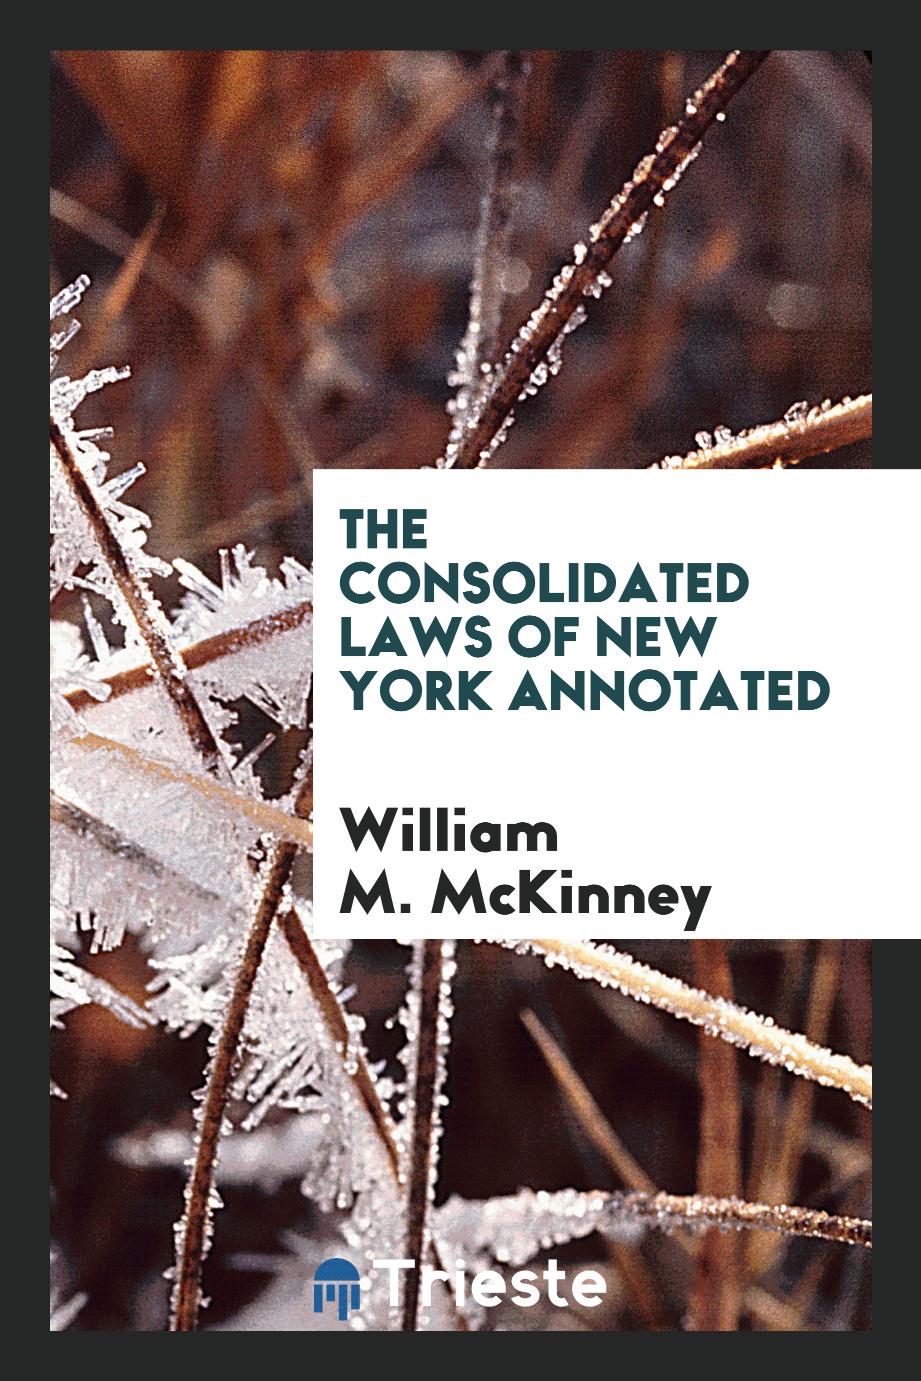 The Consolidated laws of New York annotated